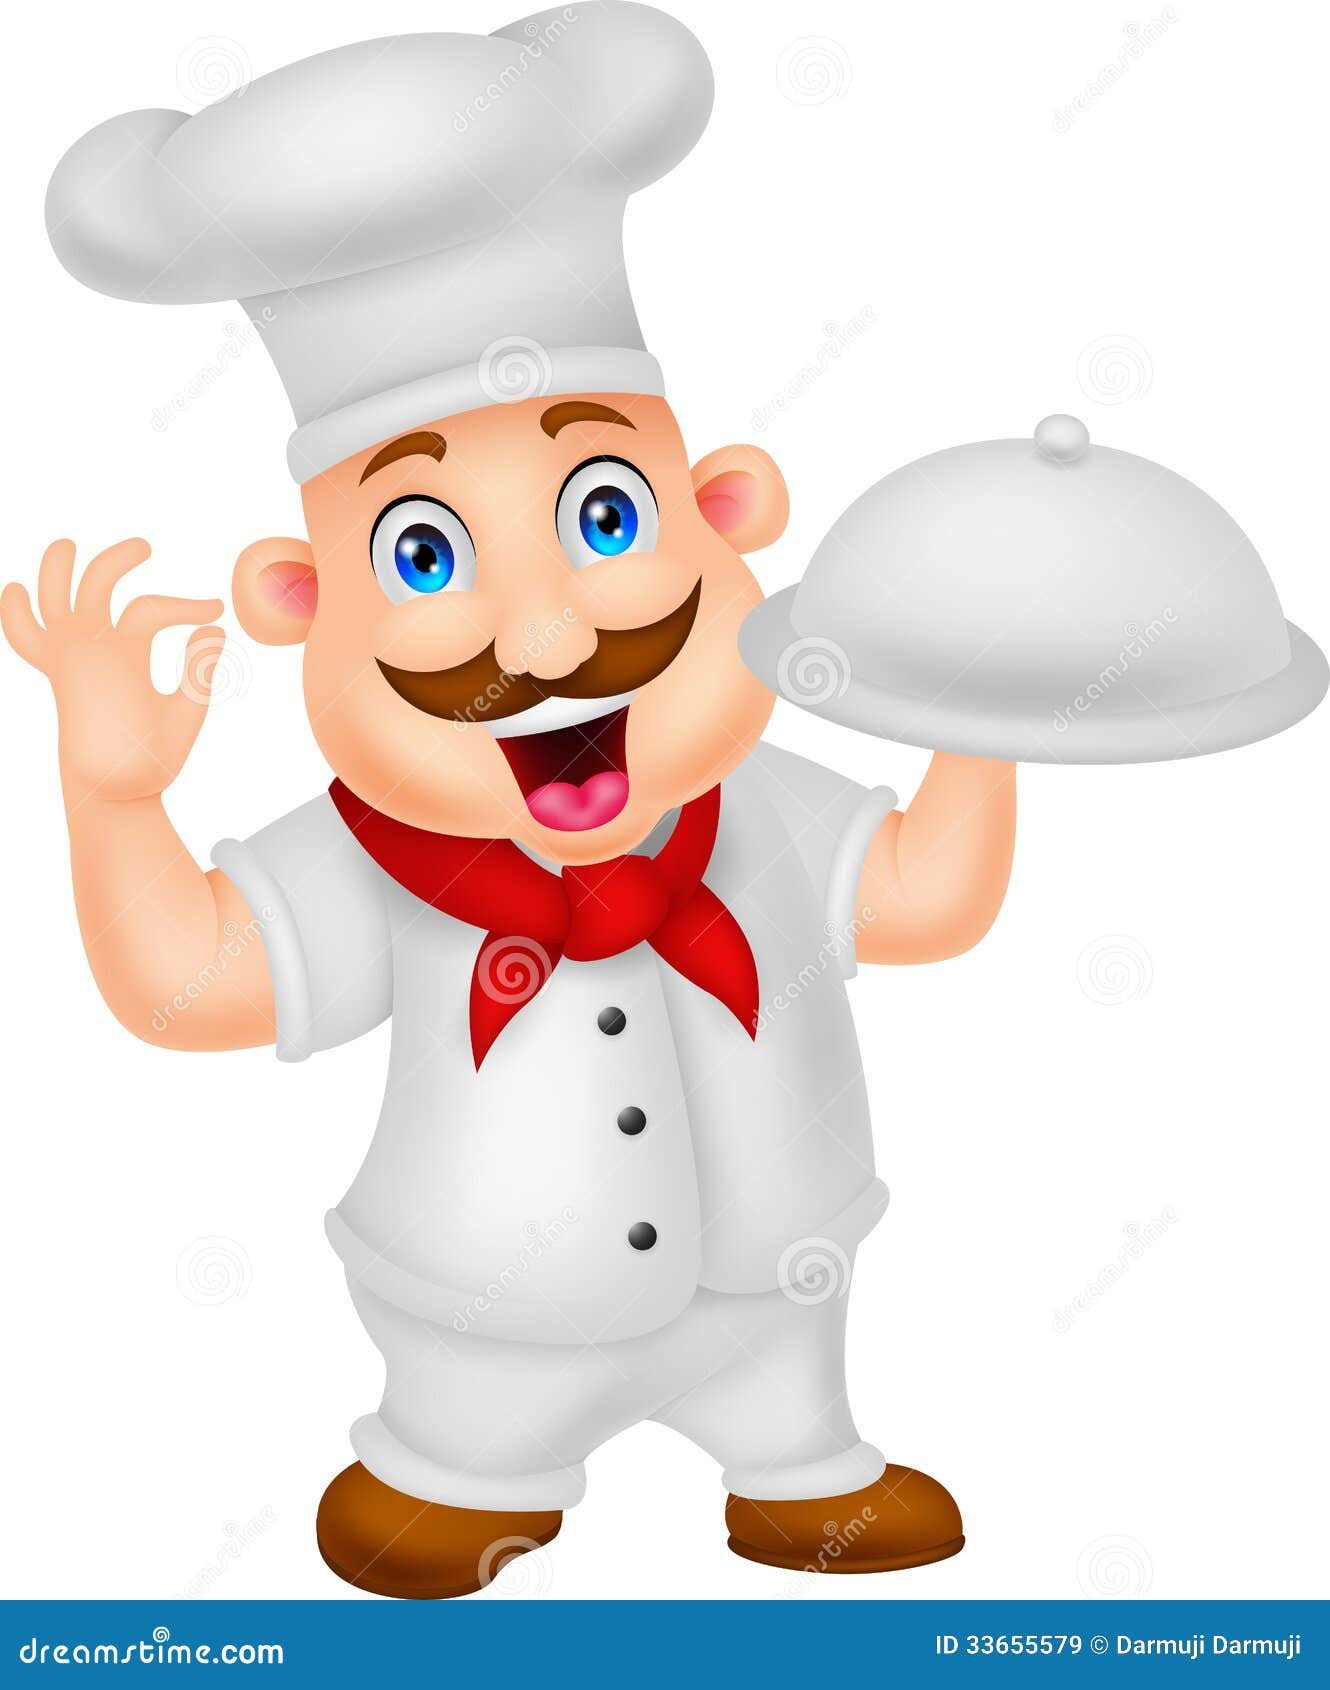 Cartoon Chef Character Royalty Free Stock Images Image 